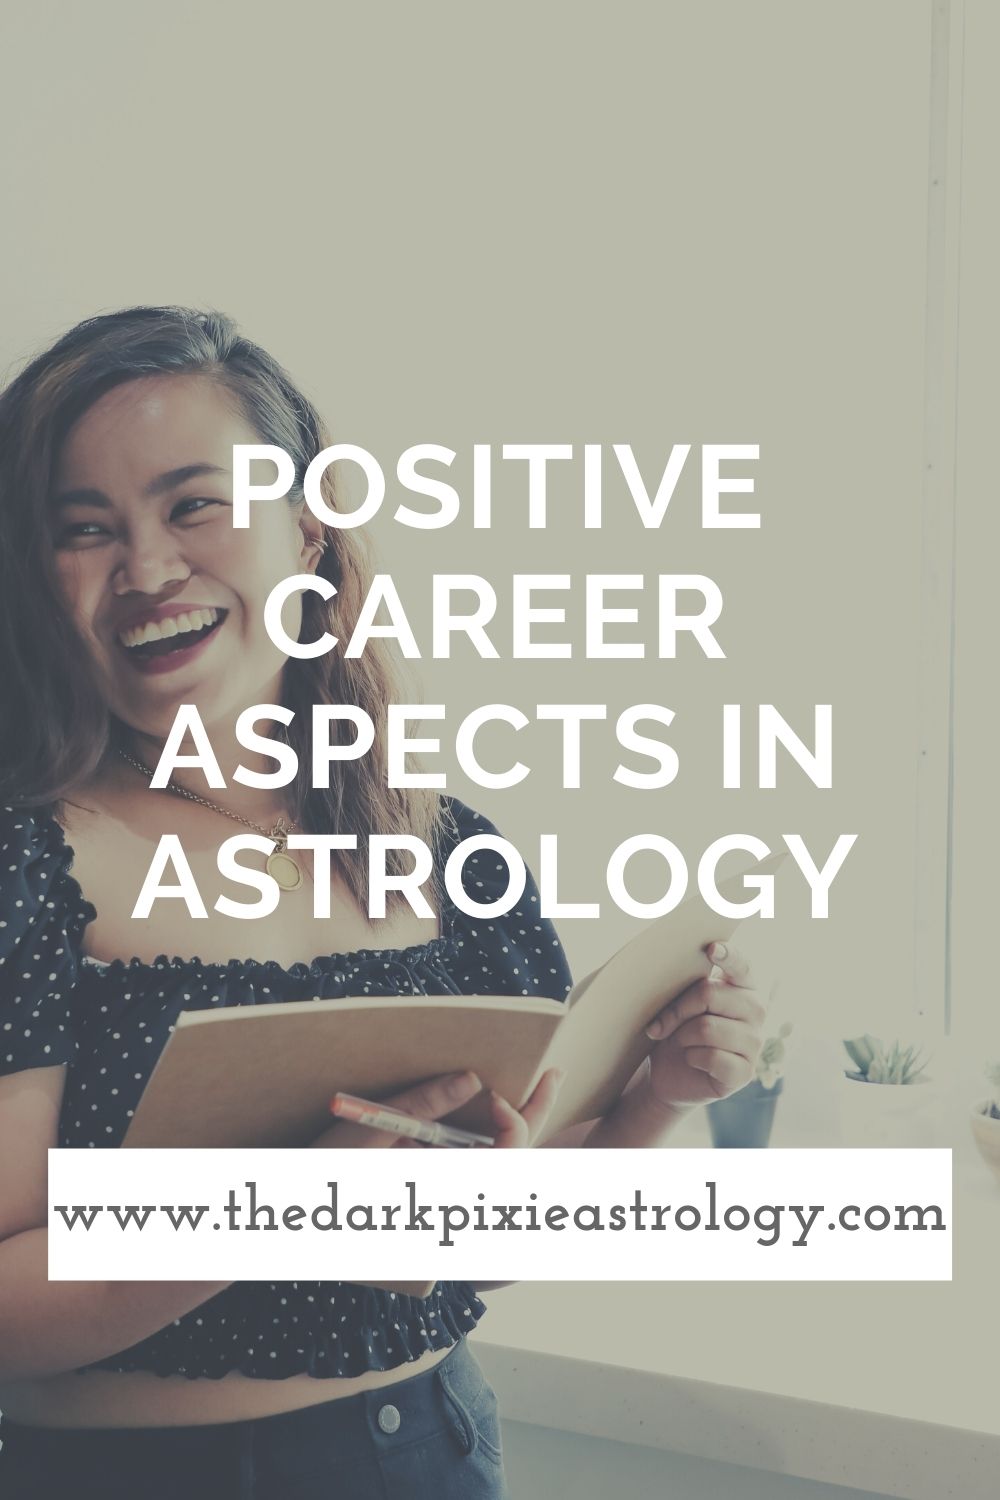 Positive Career Aspects in Astrology - The Dark Pixie Astrology